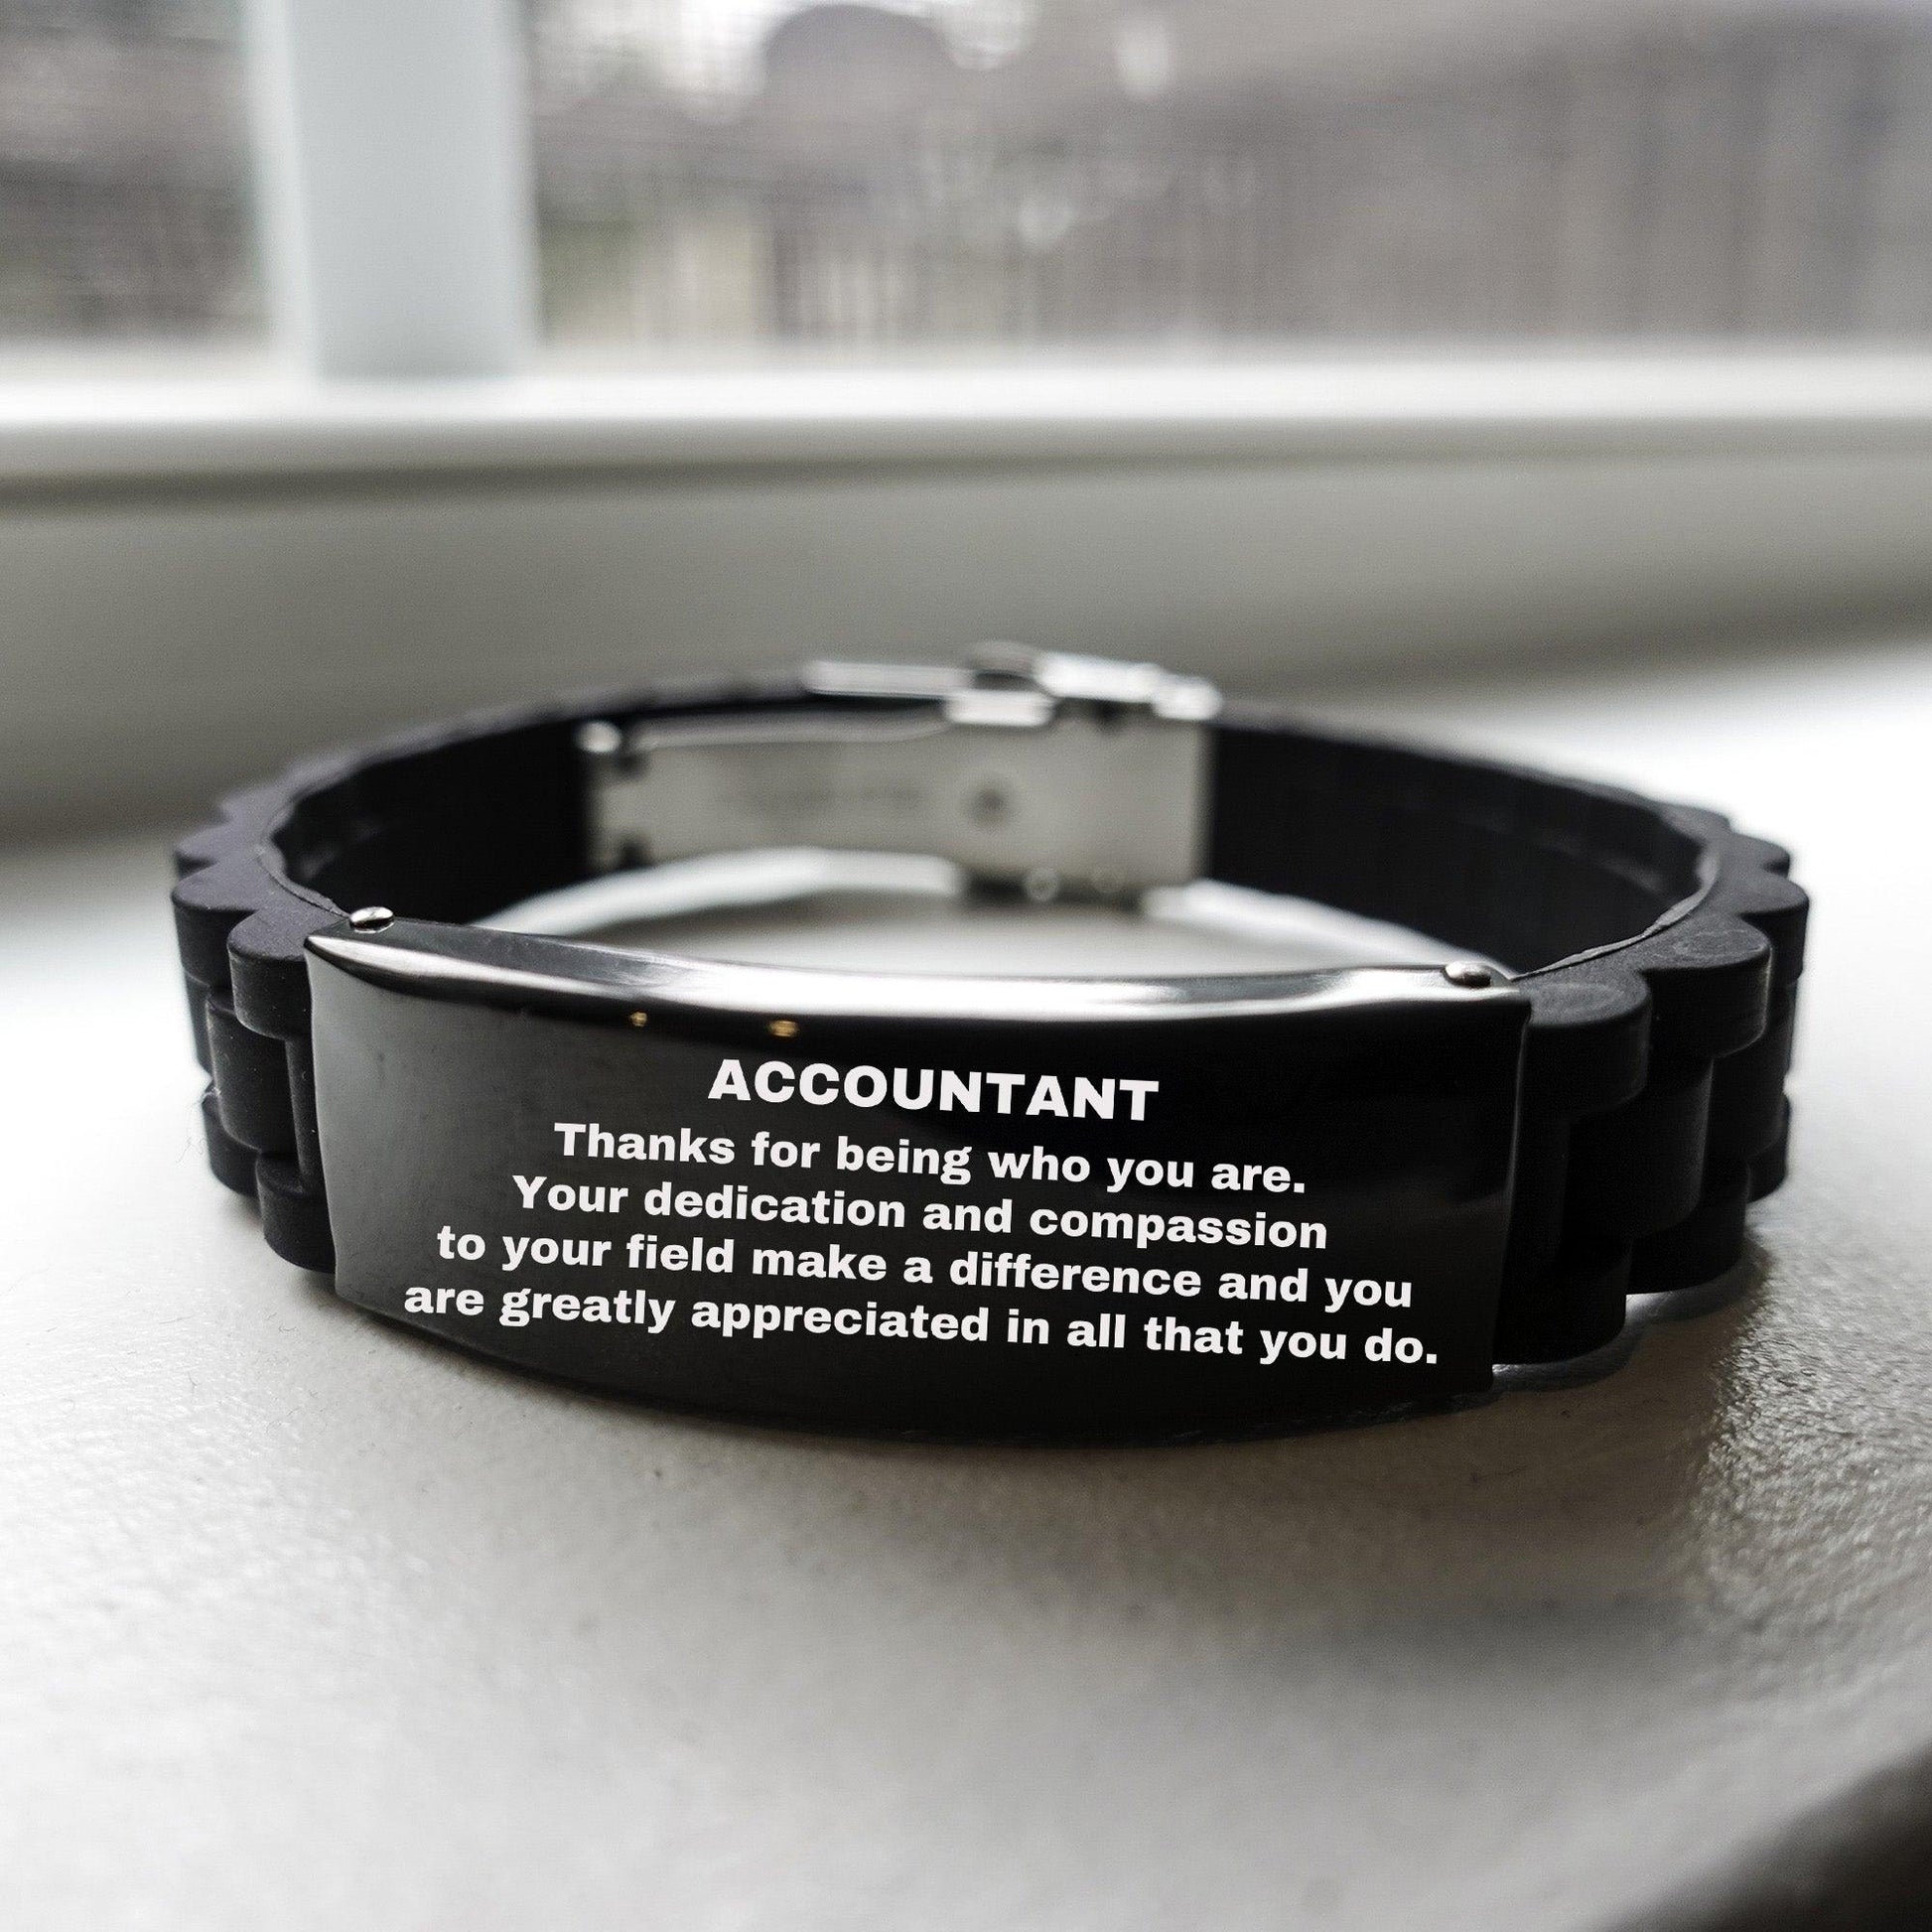 Accountant Black Glidelock Clasp Engraved Bracelet - Thanks for being who you are - Birthday Christmas Jewelry Gifts Coworkers Colleague Boss - Mallard Moon Gift Shop